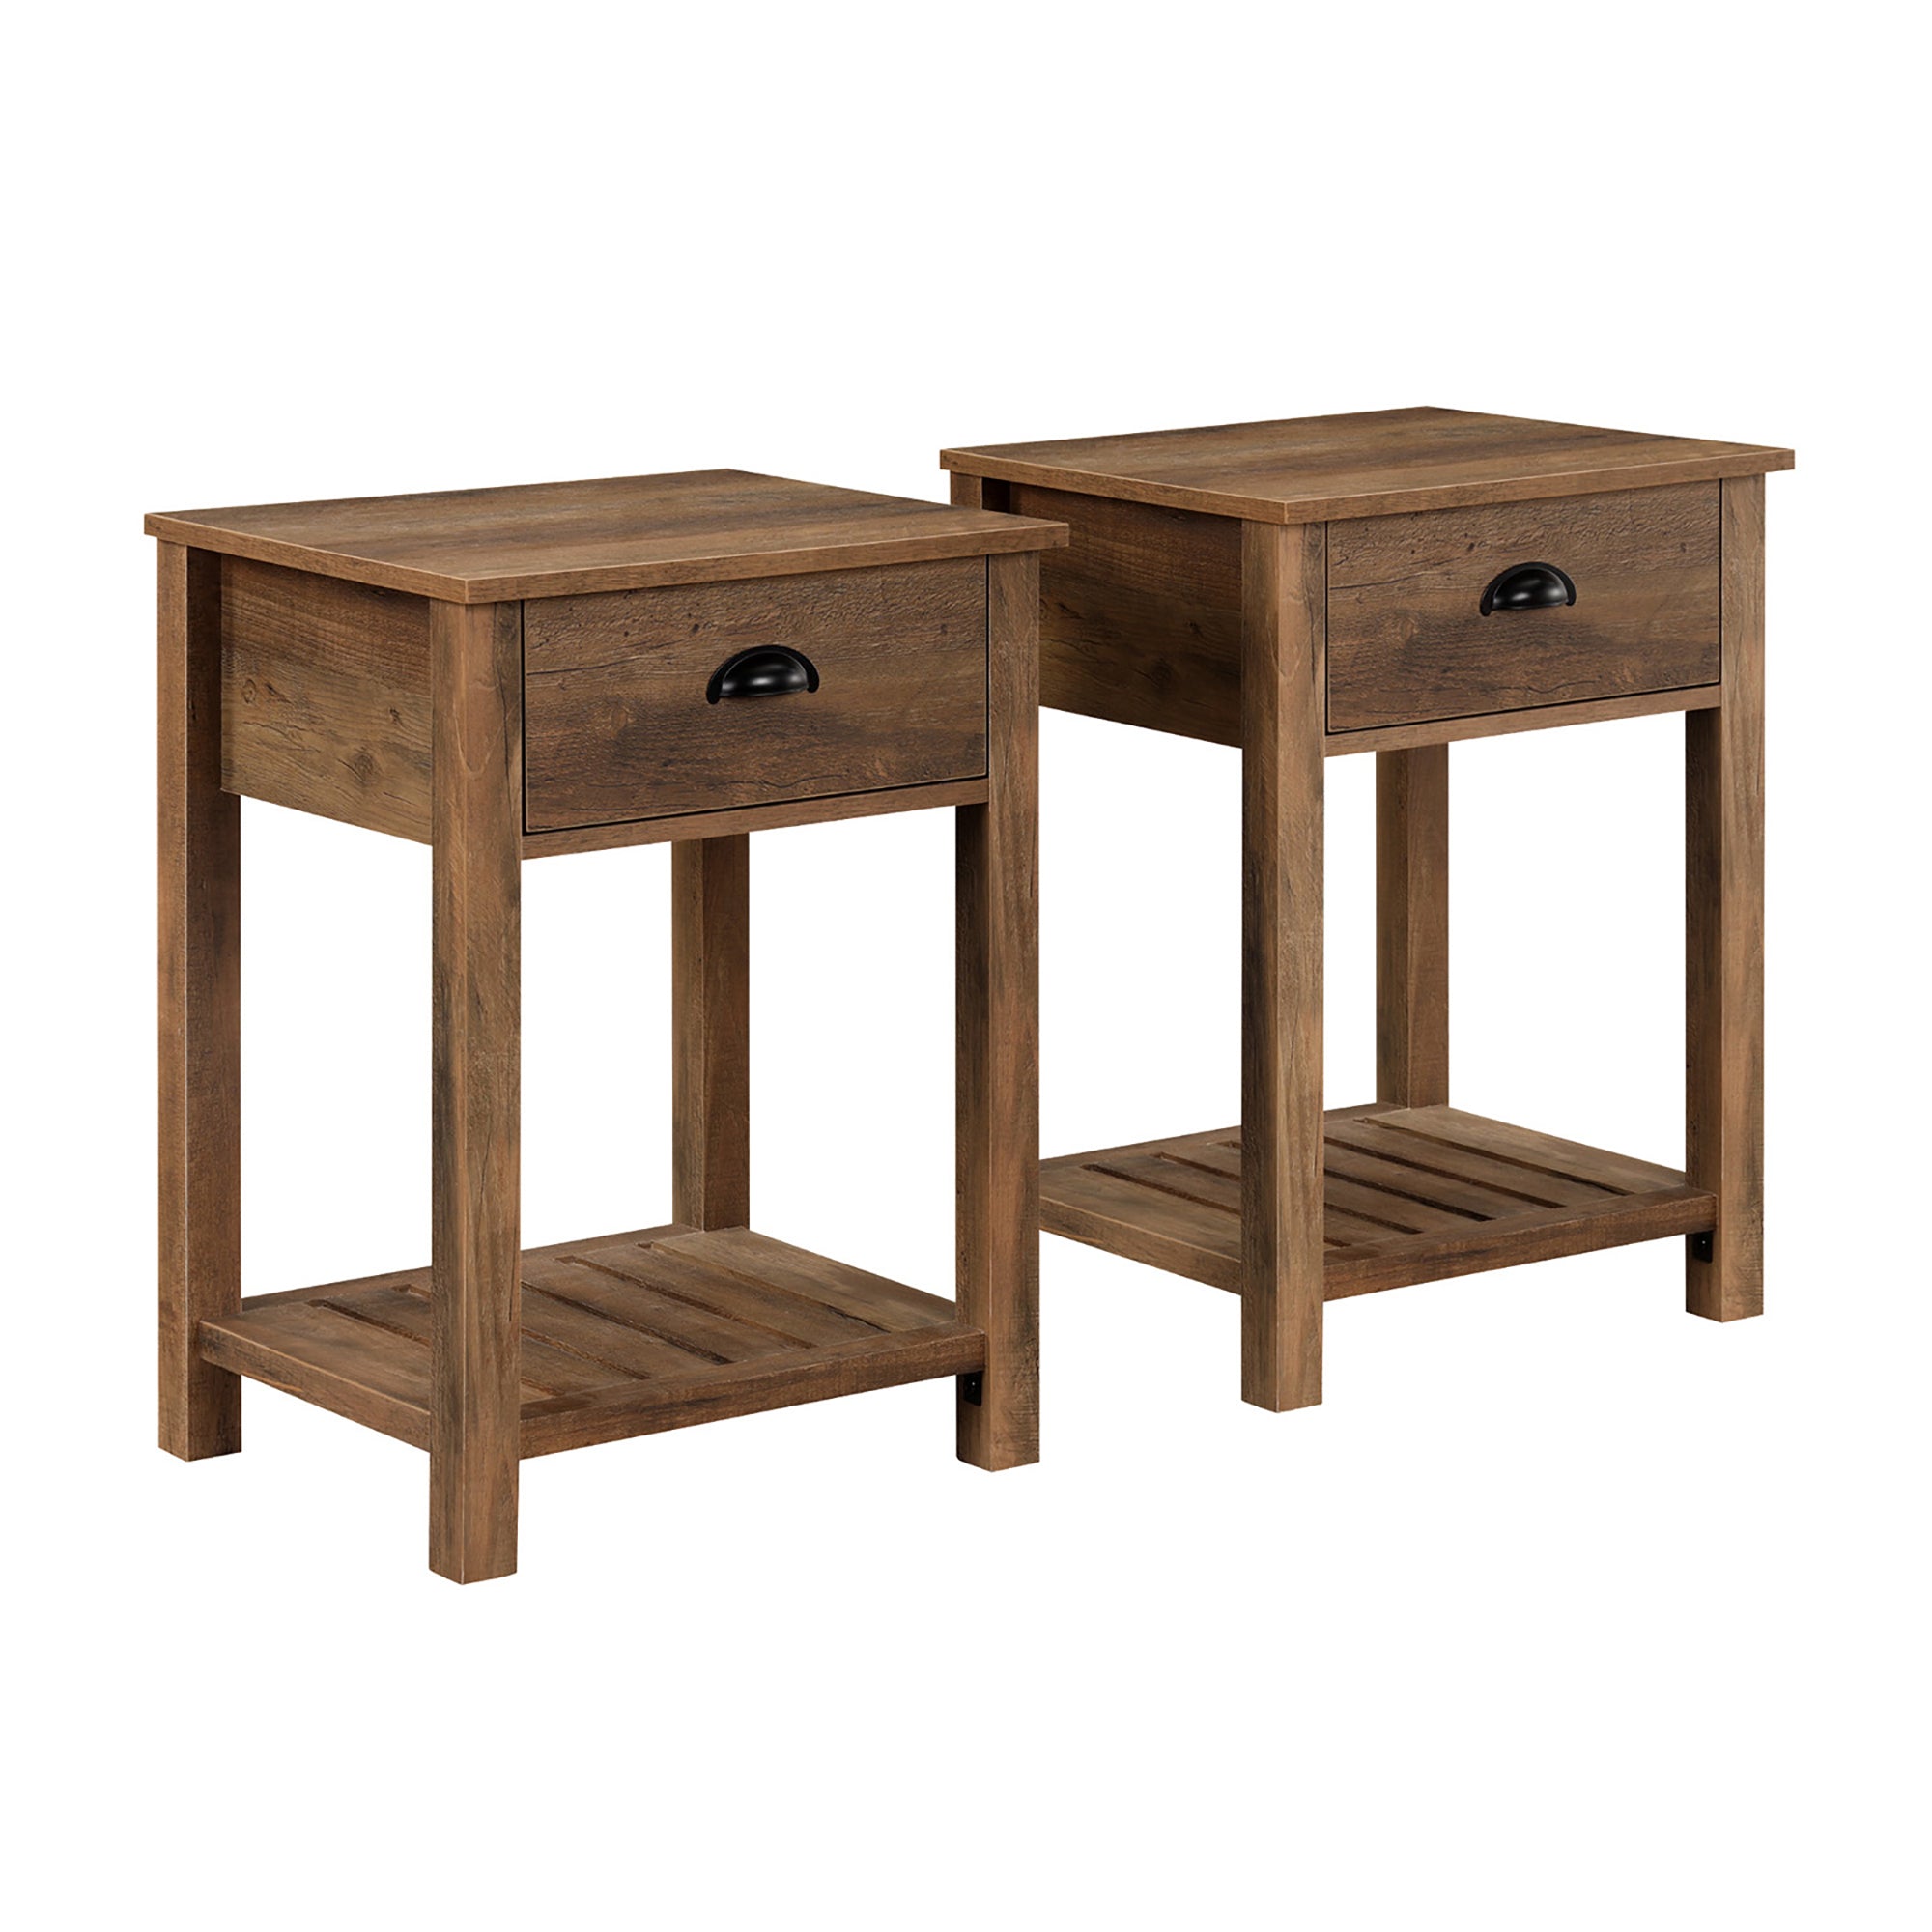 18" Country Farmhouse Single Drawer Side Table Set - East Shore Modern Home Furnishings